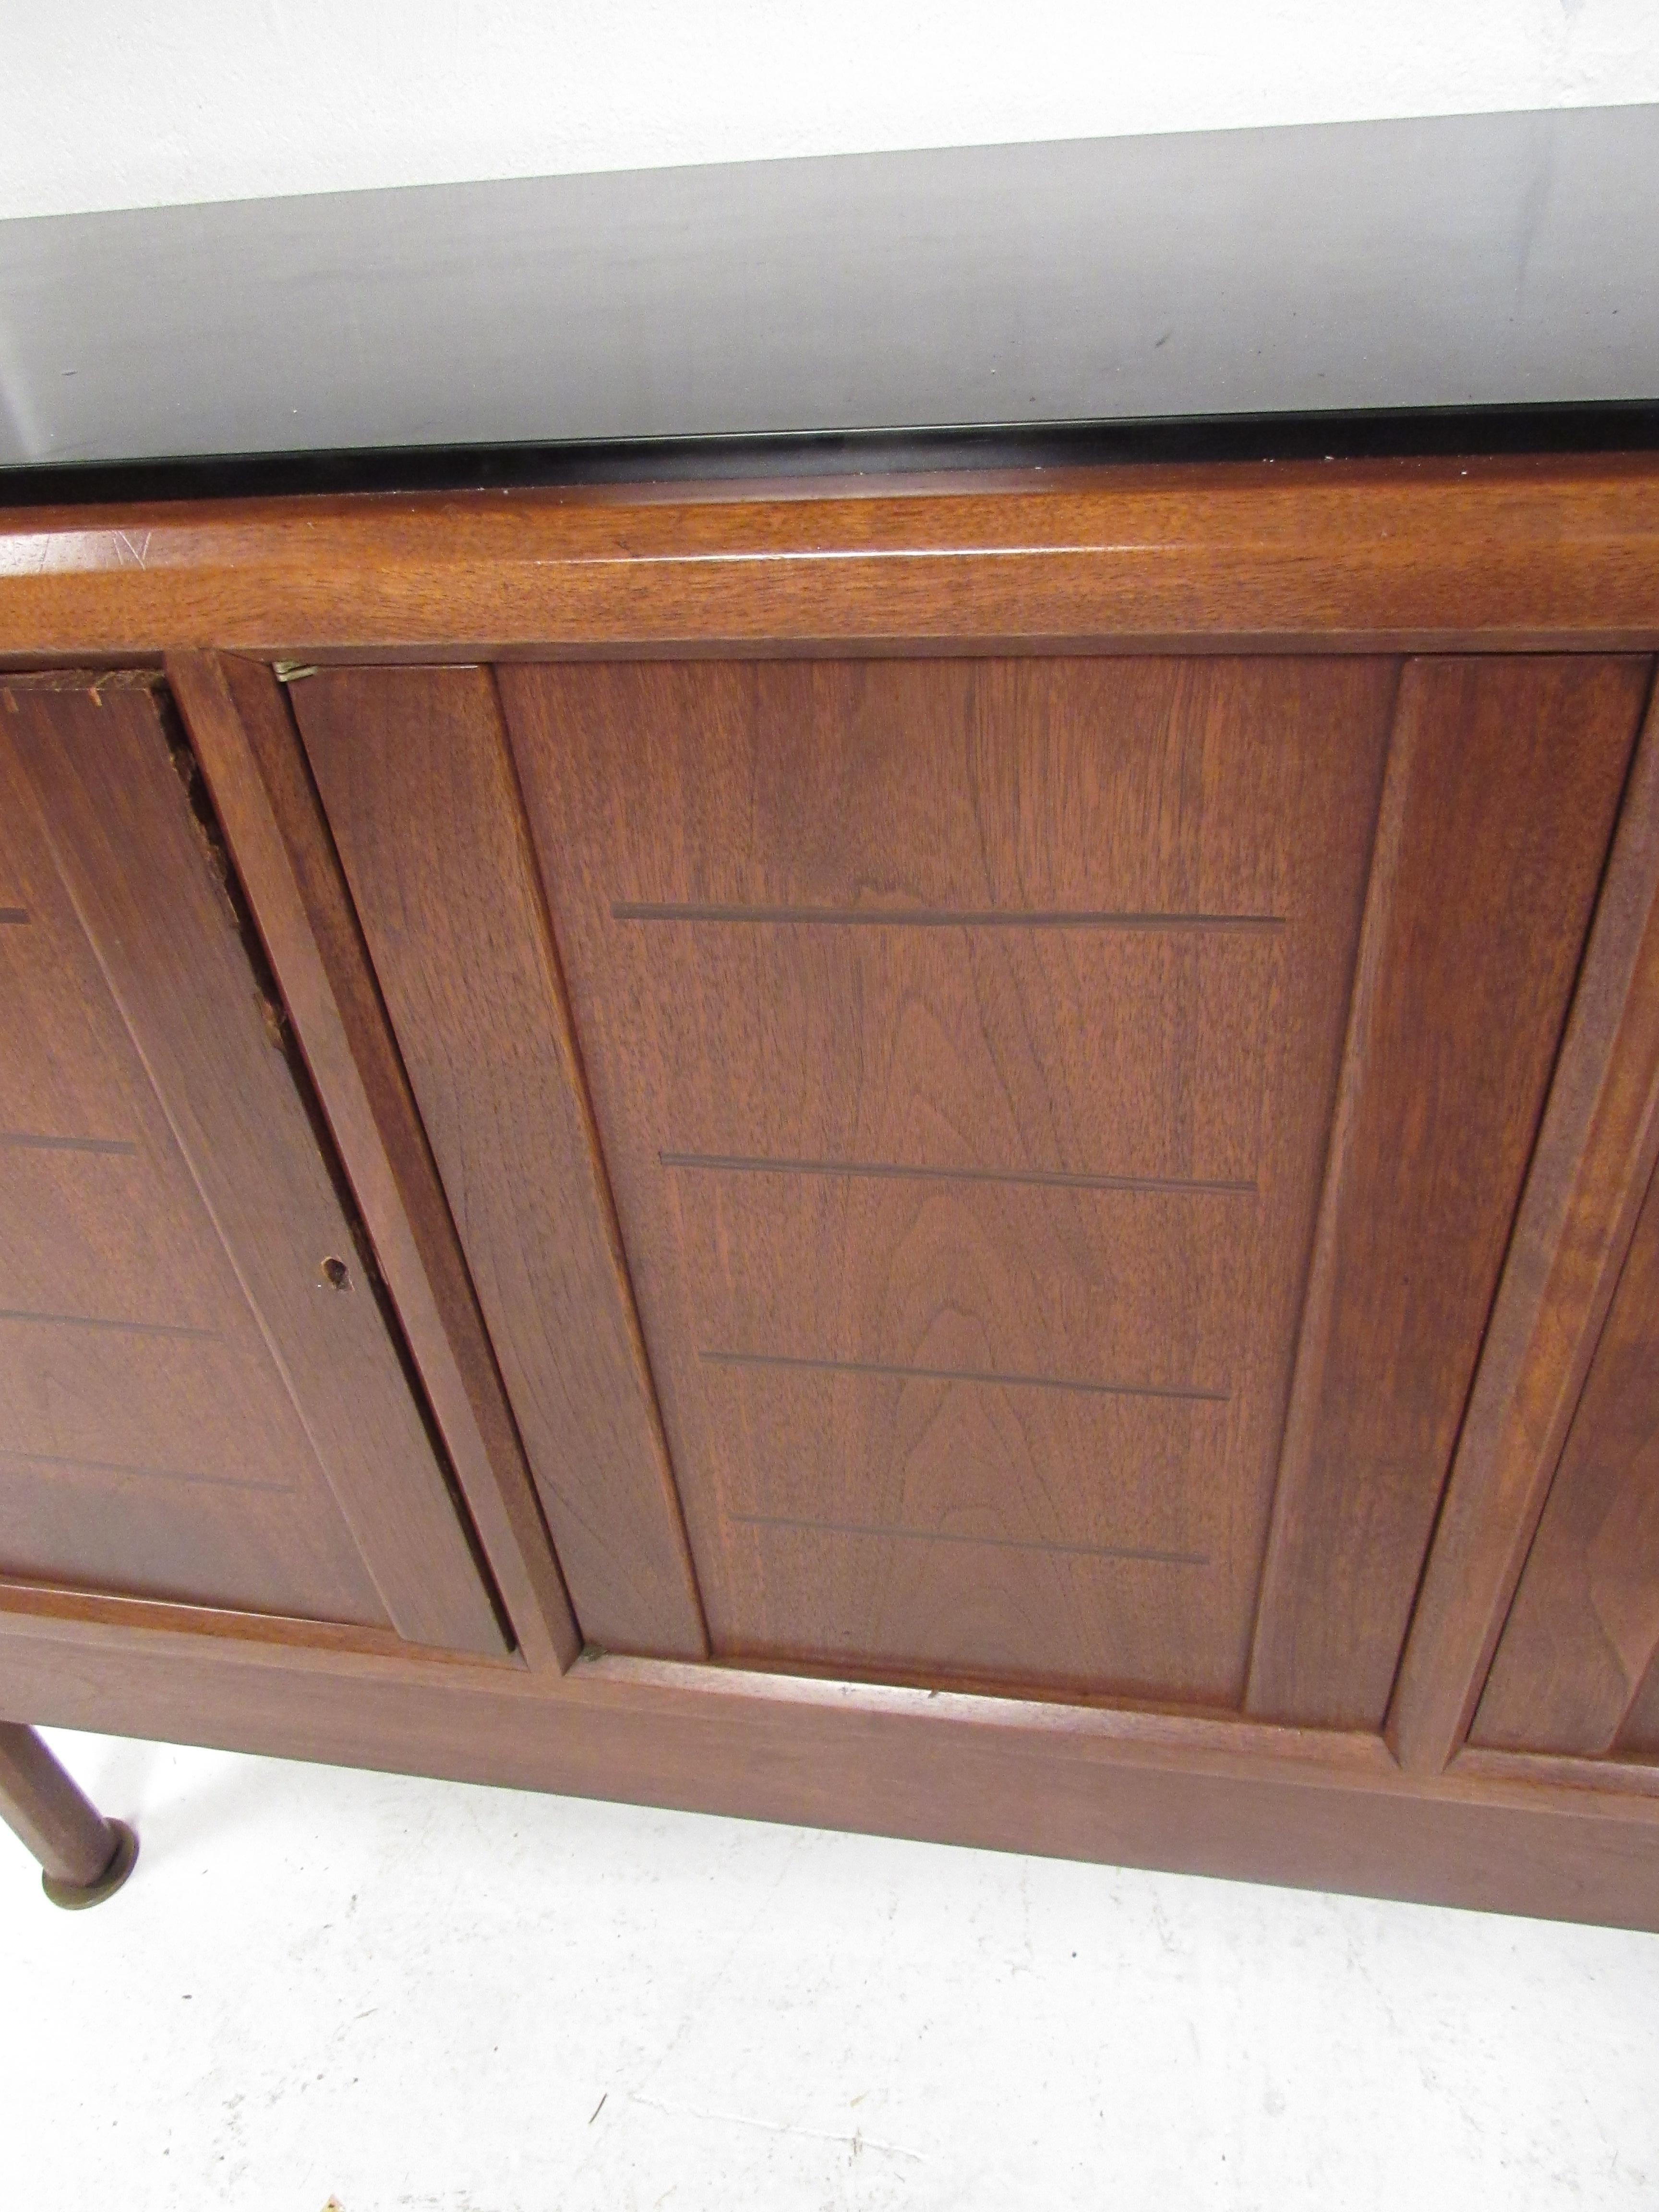 North American Rare Mid-Century Modern Breakfront Cabinet by Edward Wormley for Dunbar